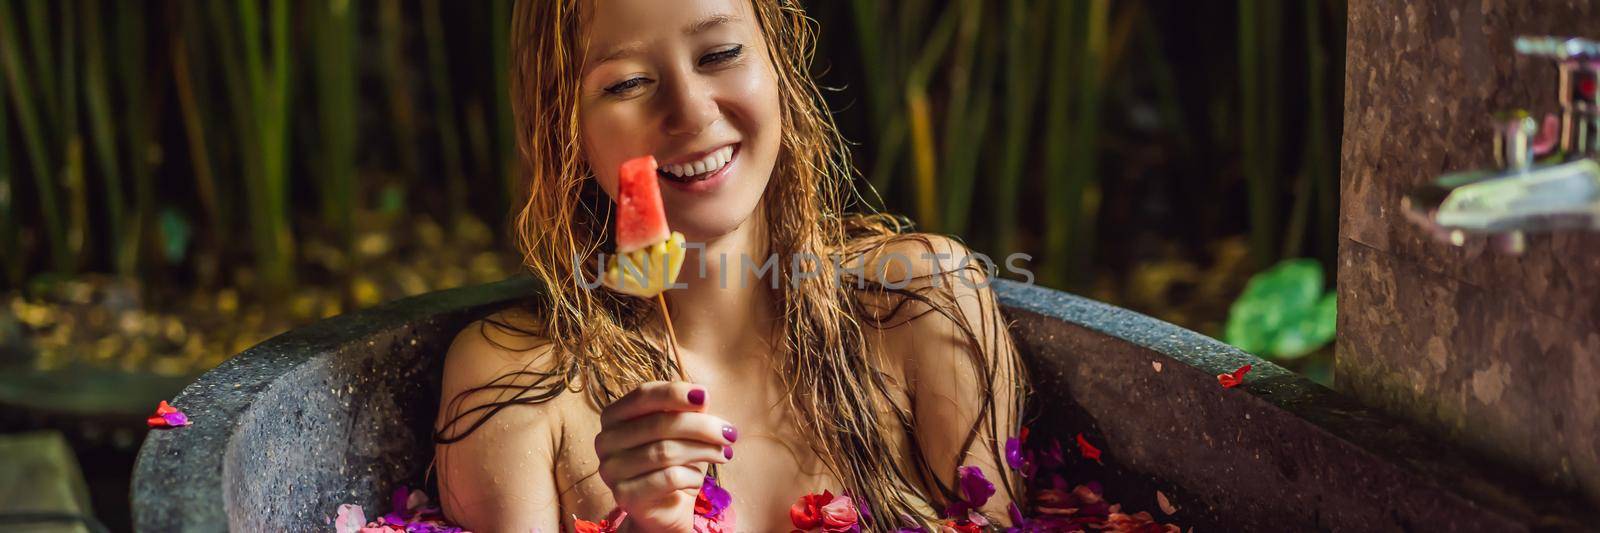 Attractive Young woman in bath with petals of tropical flowers and aroma oils. Spa treatments for skin rejuvenation. Alluring woman in Spa salon. Girl relaxing in bathtub with flower petals. Luxury. BANNER, LONG FORMAT